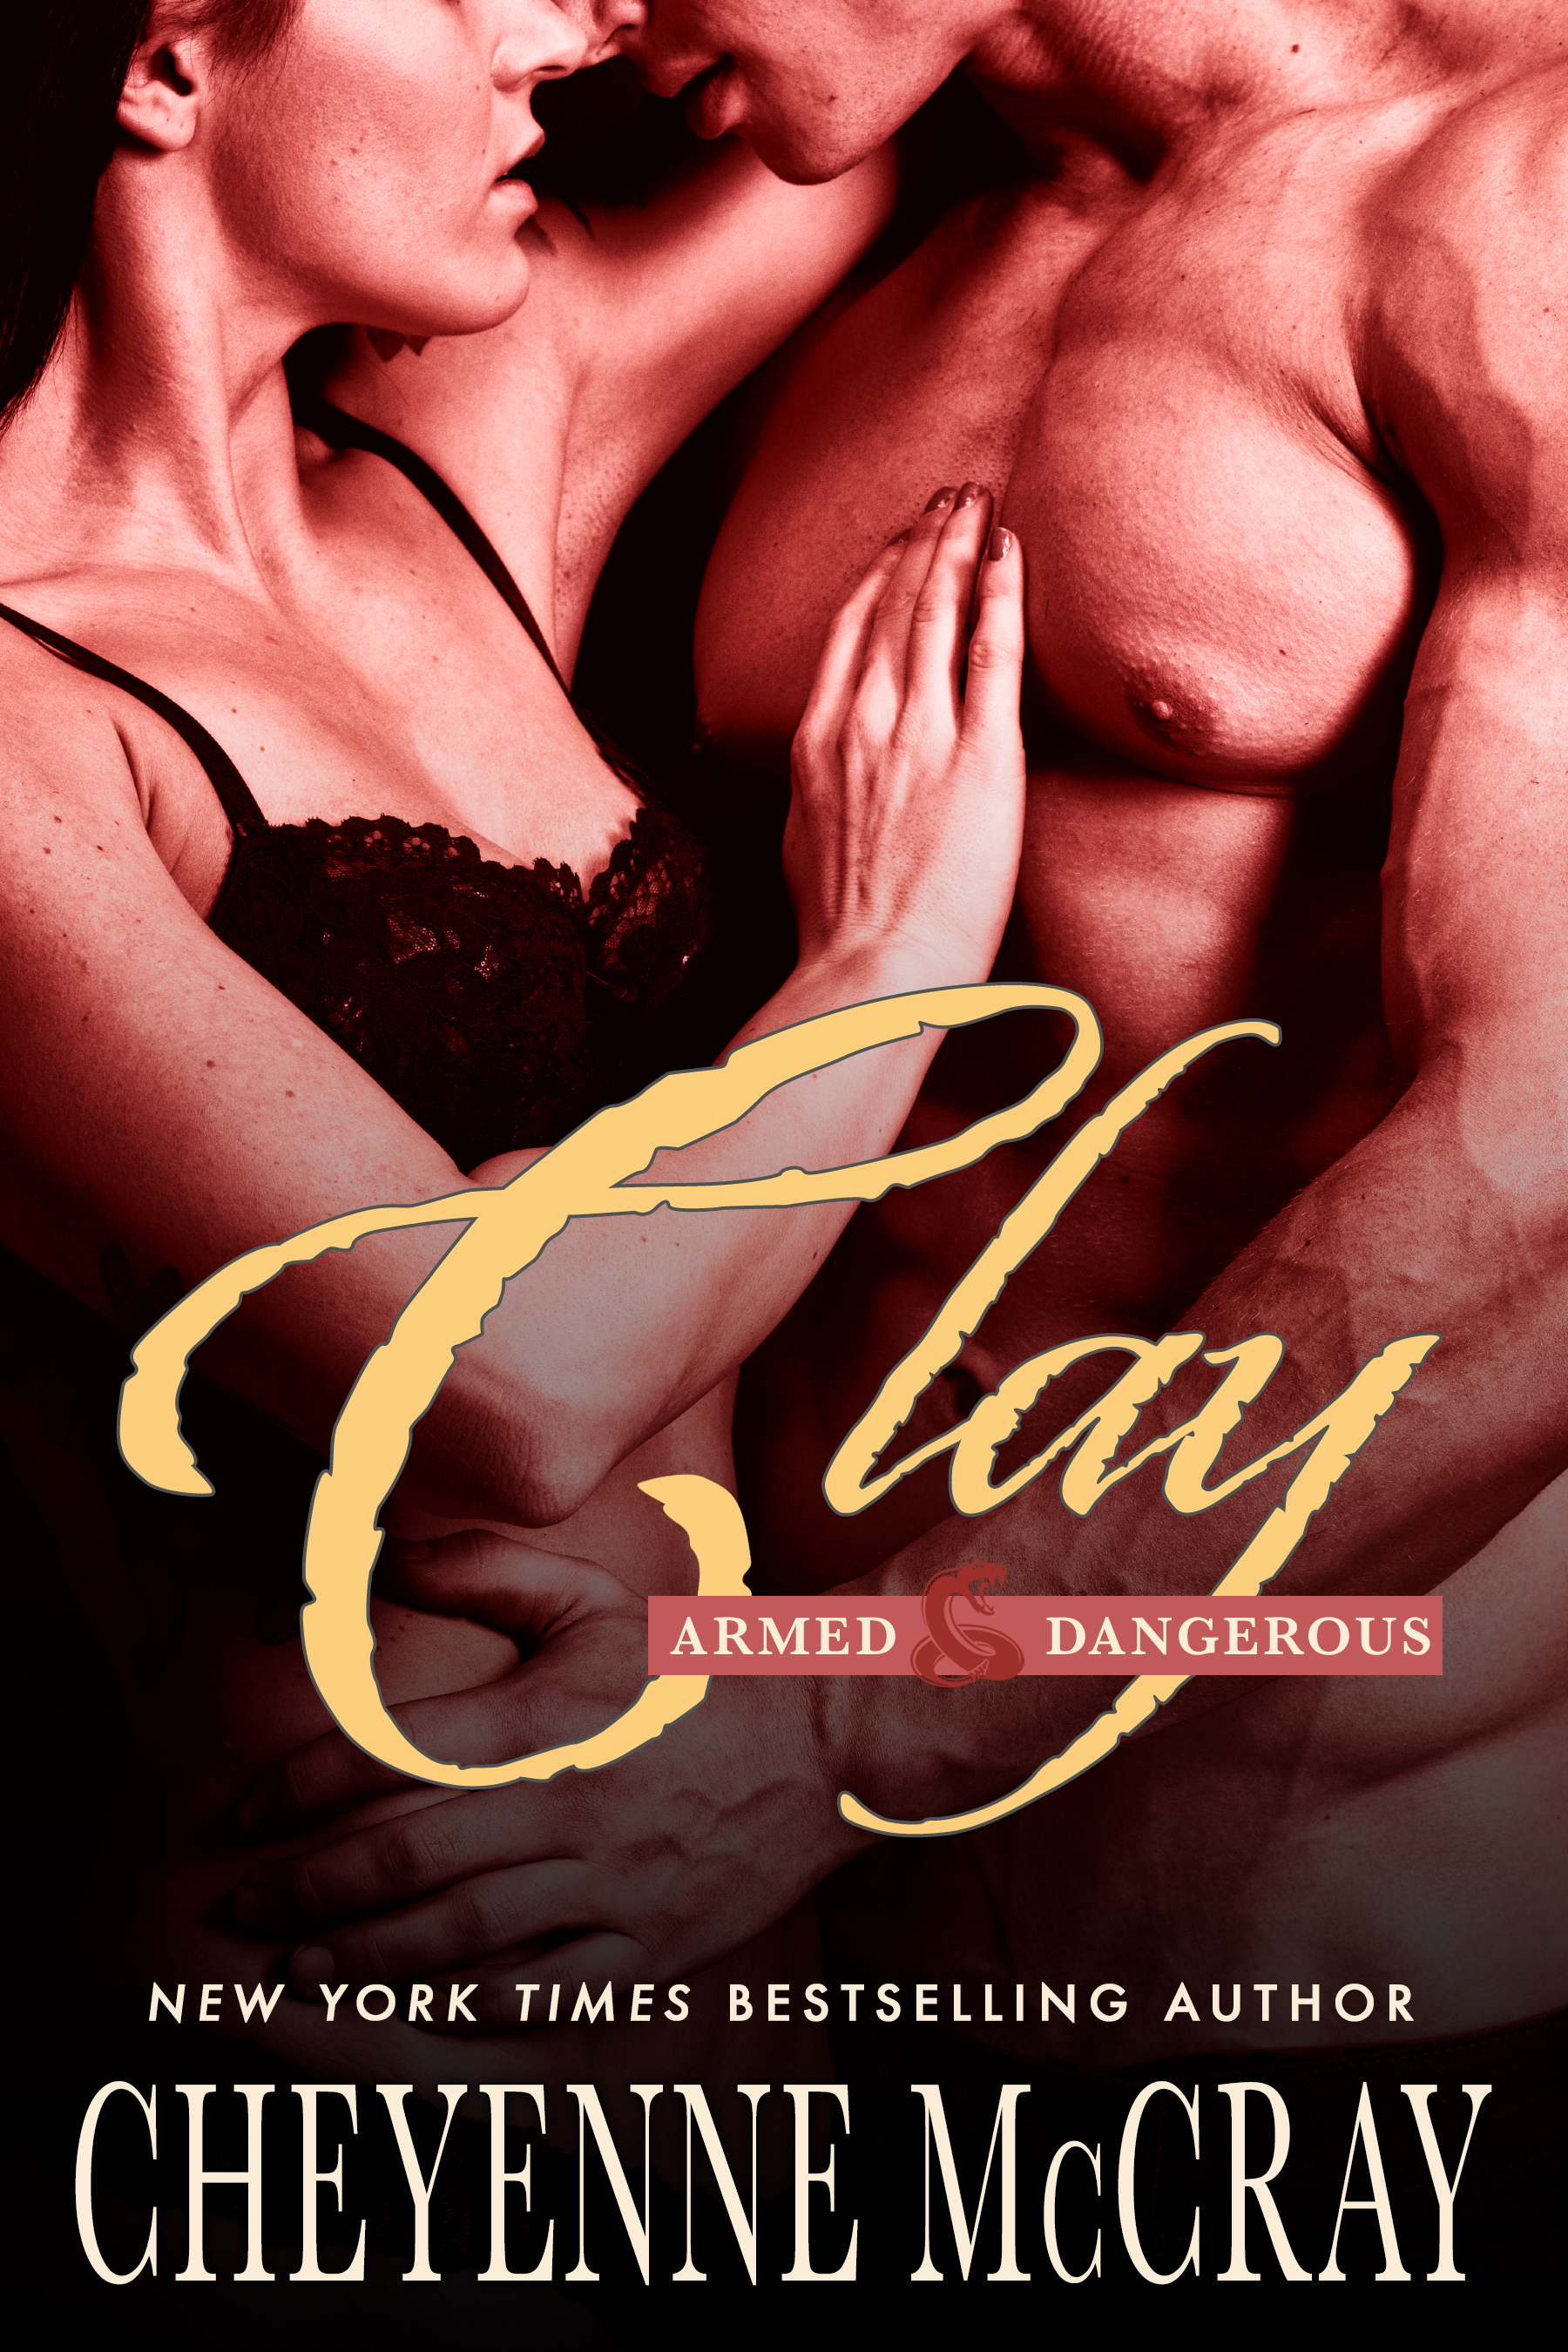 Clay: Armed and Dangerous (2015) by Cheyenne McCray